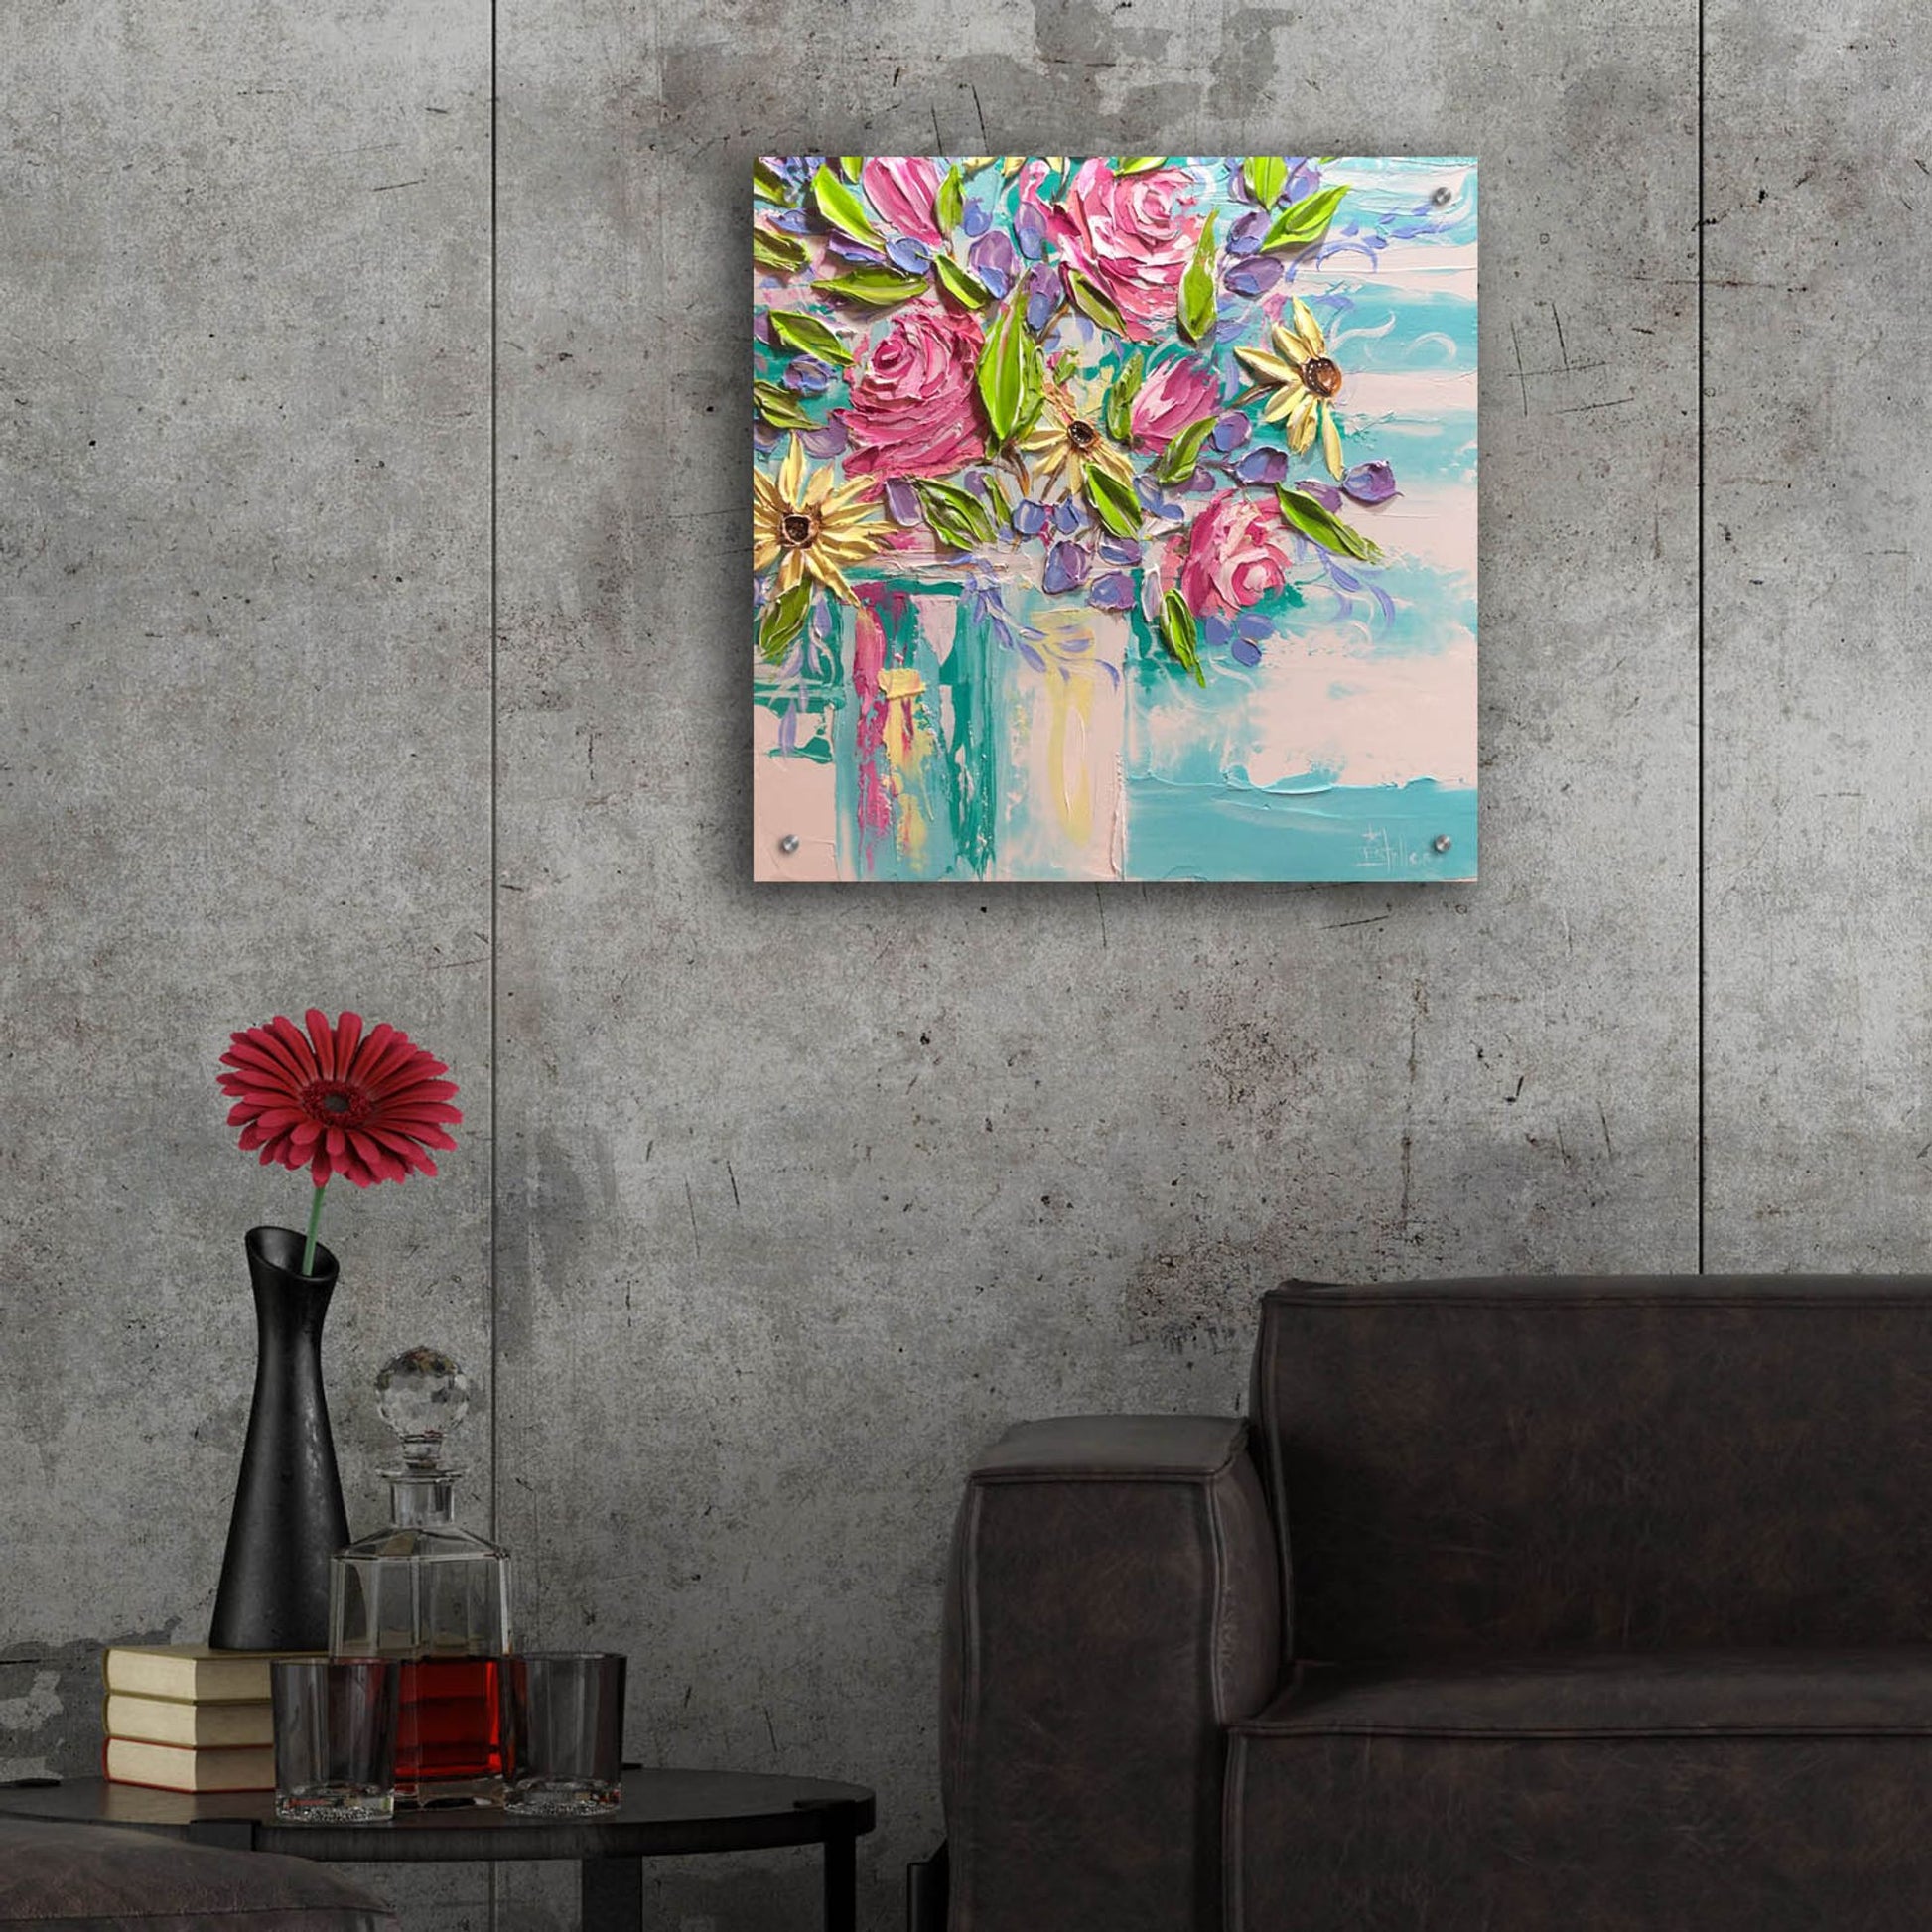 Epic Art 'Floral Bliss' by Estelle Grengs, Acrylic Glass Wall Art,24x24